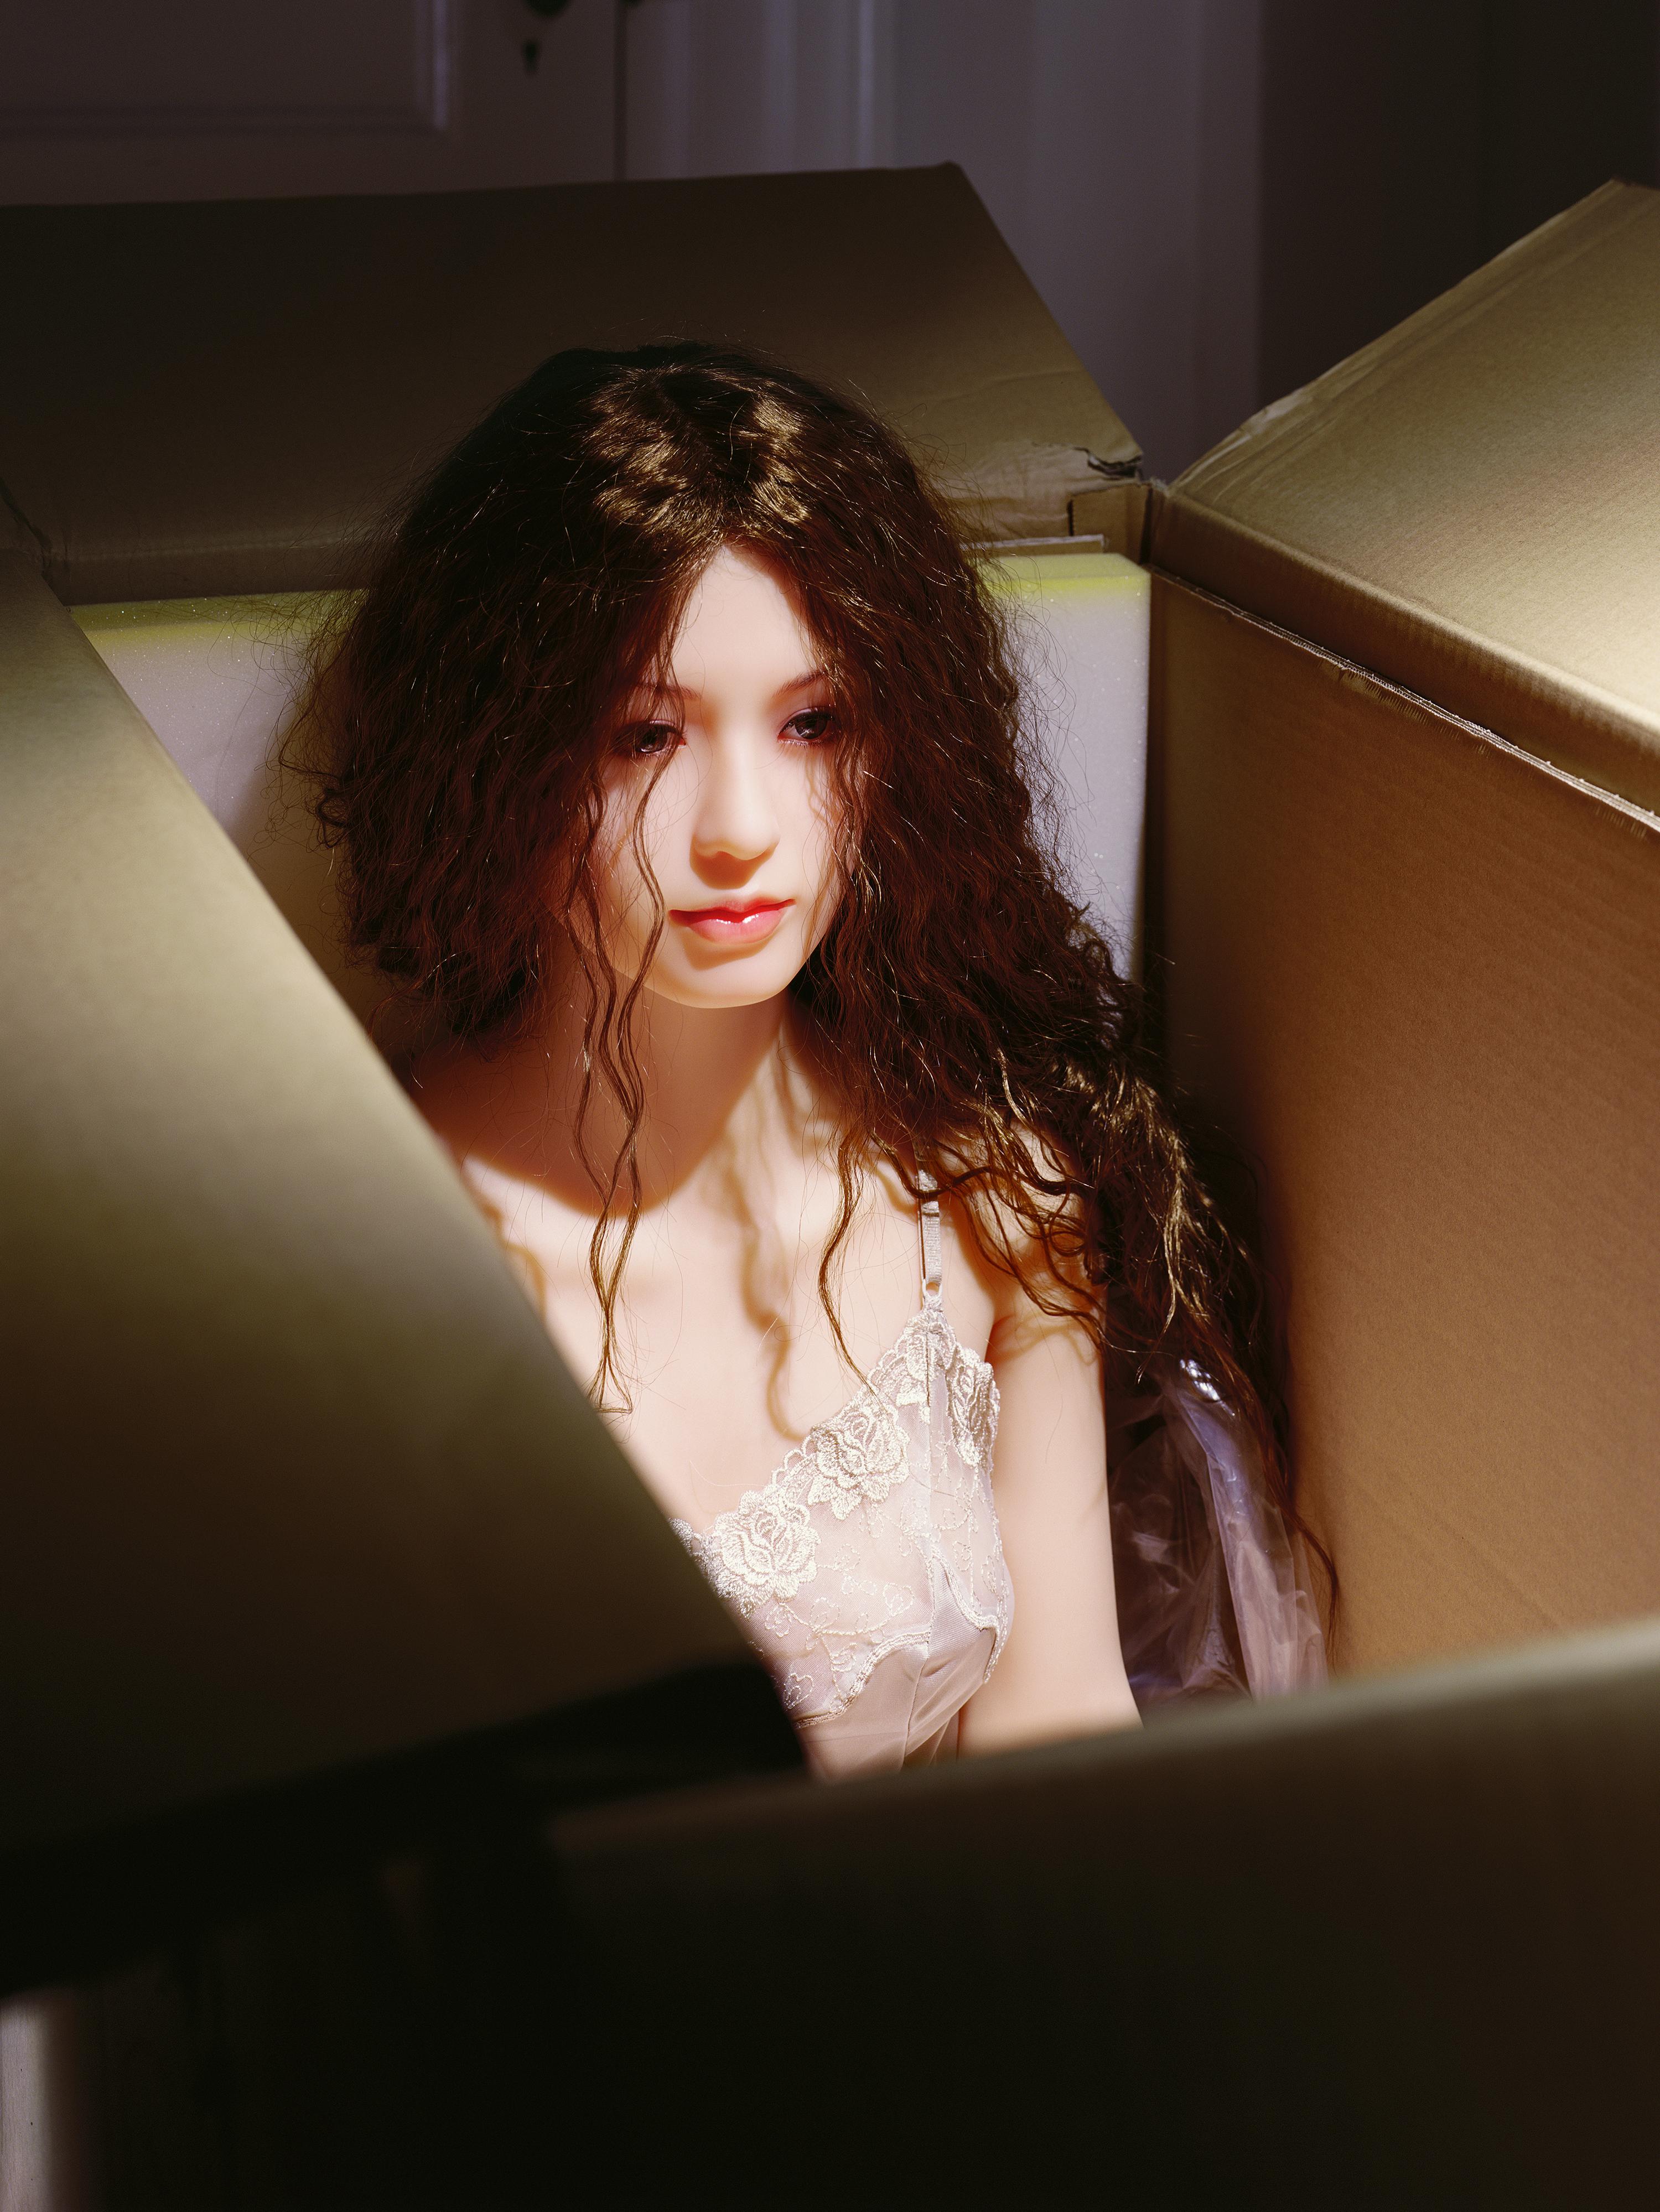 A feminine doll with long hair sits upright in a cardboard box. She wears a white negligee with lace details.